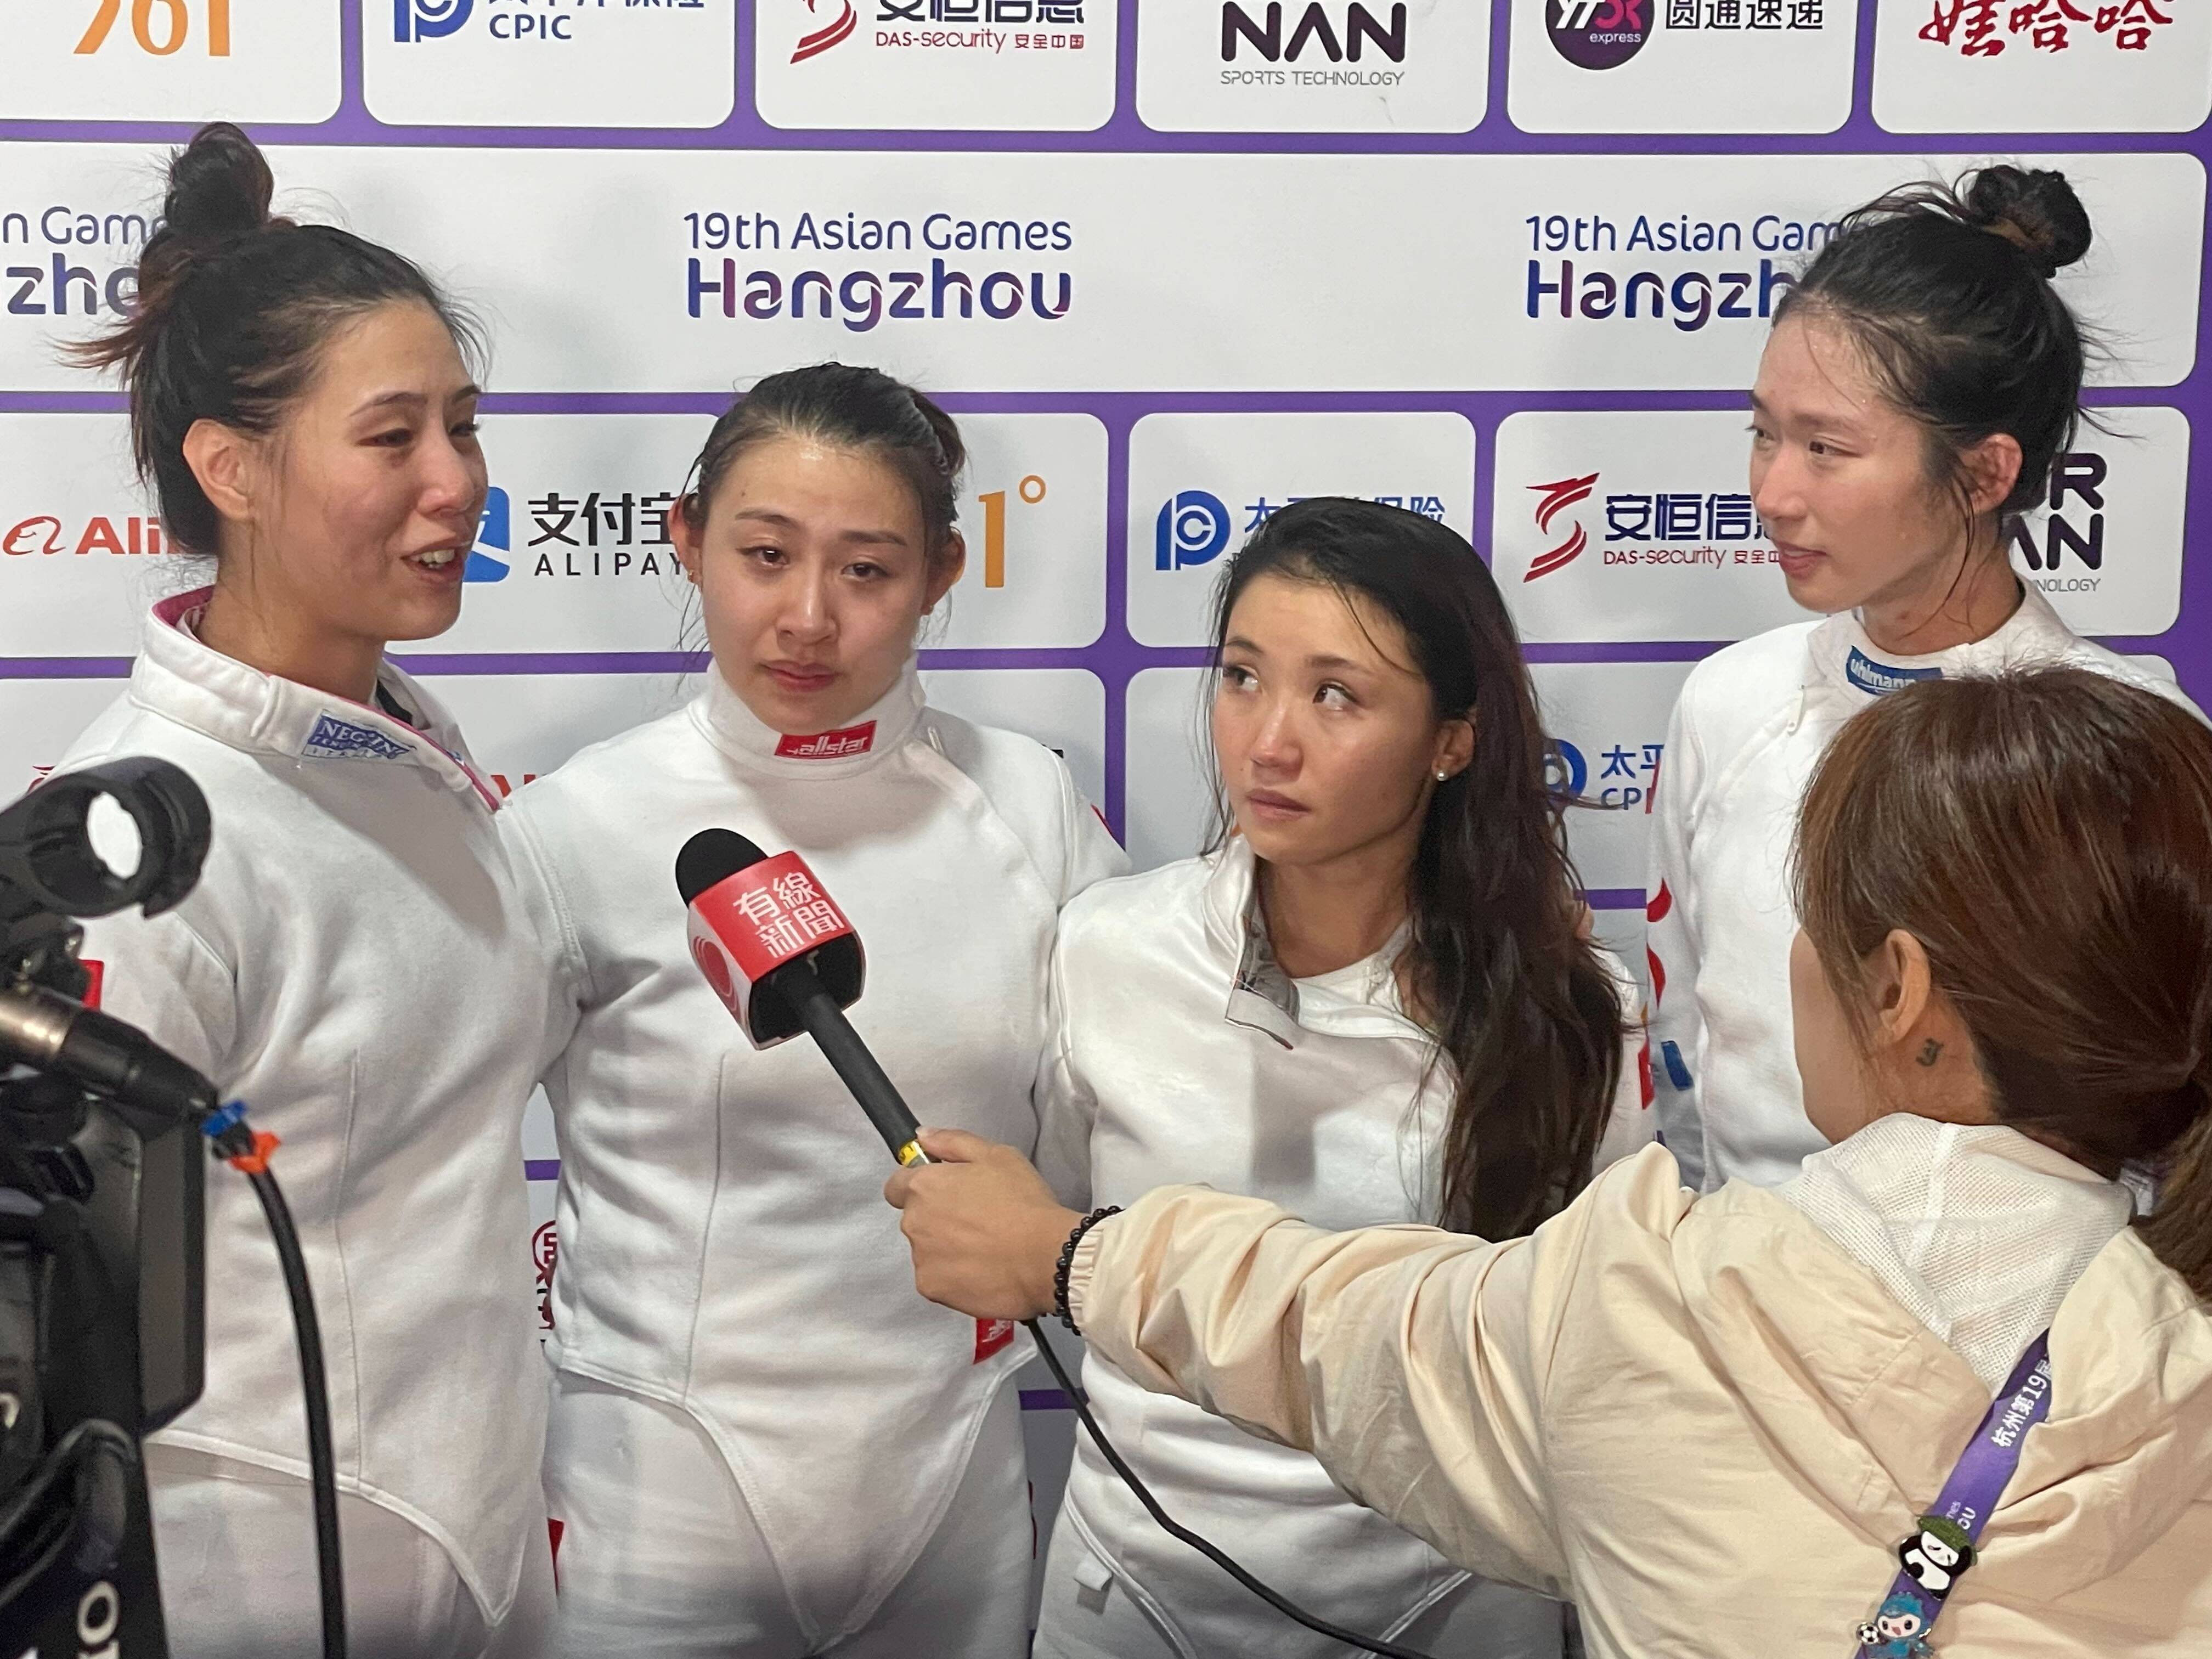 Hong Kong’s women’s epee team could not hold back their tears when giving live television interviews, after missing out on Asian Games gold. Photo: Mike Chan
